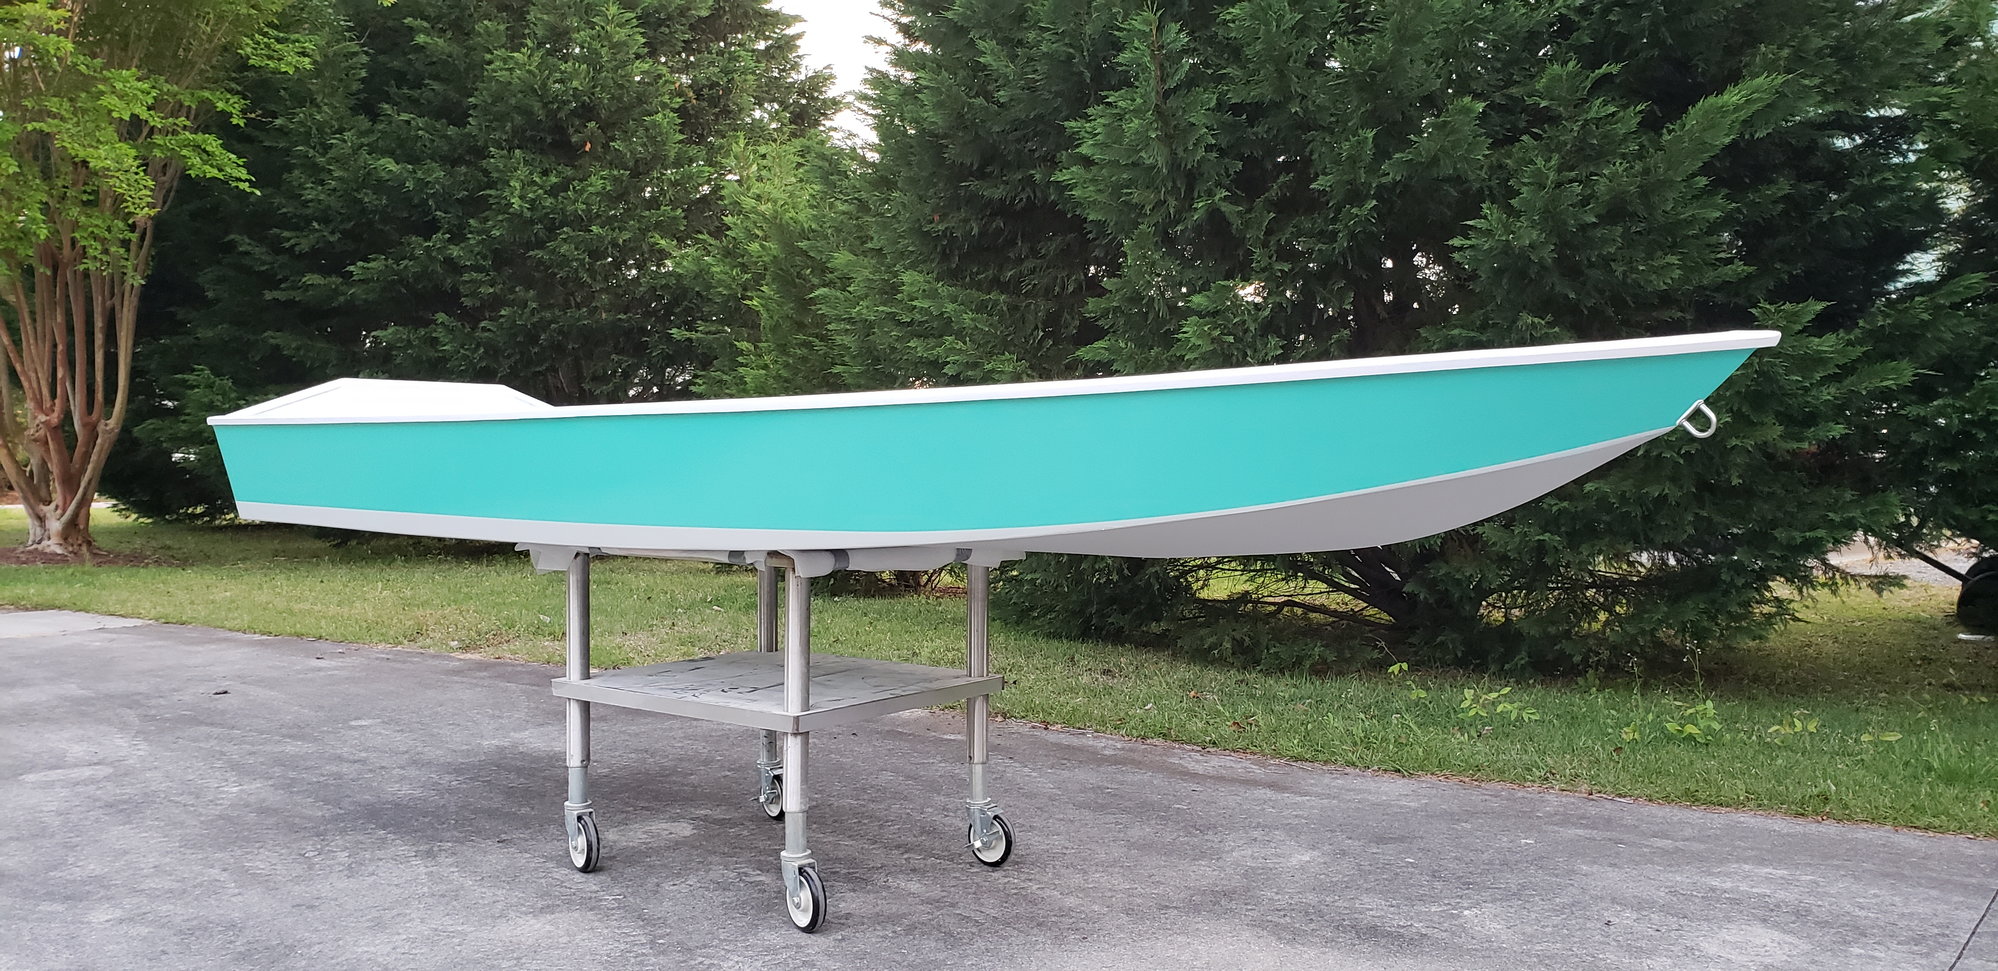 FRS-12 solo skiff build - The Hull Truth - Boating and 